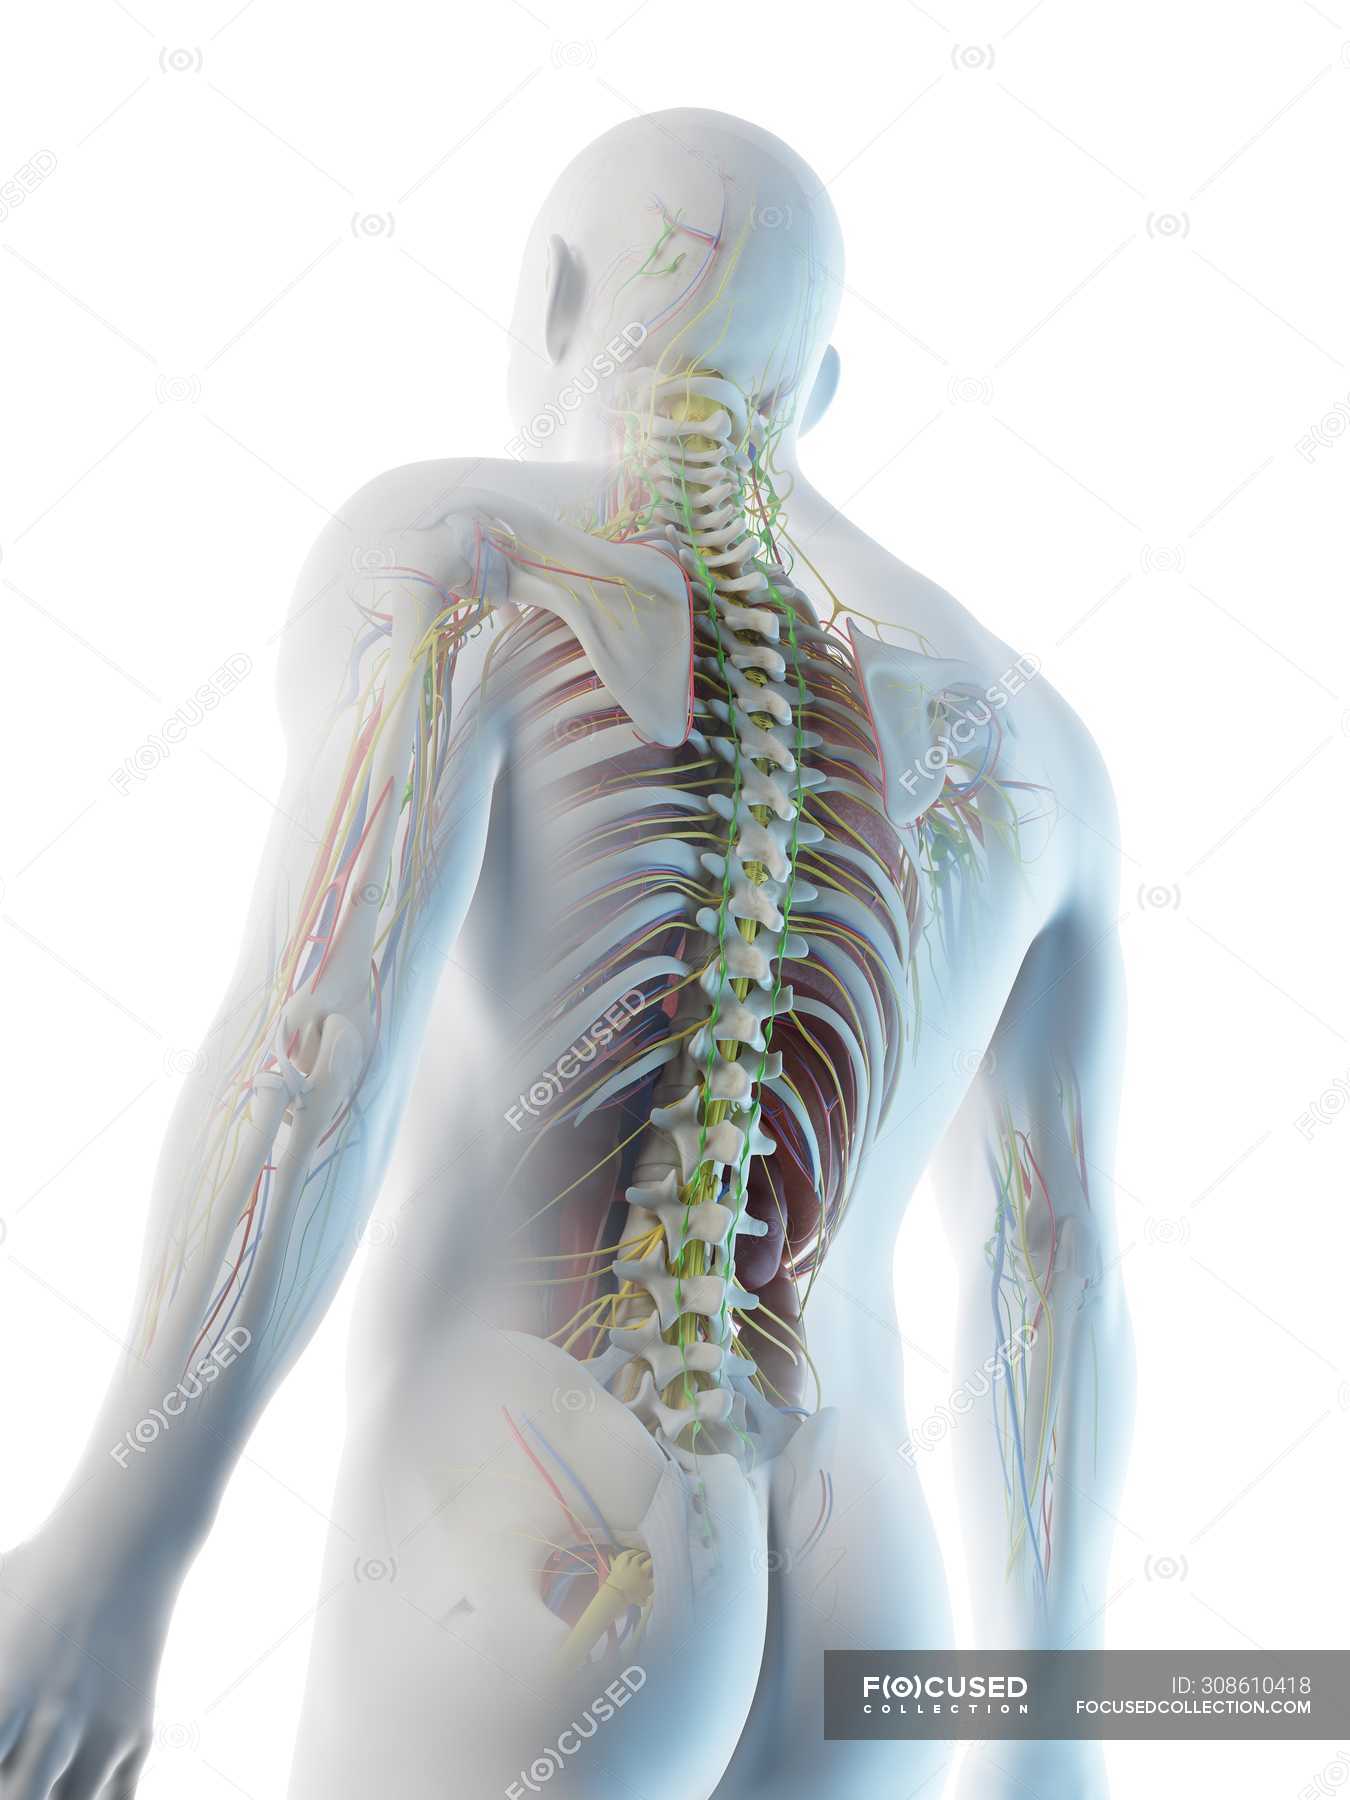 Low Angle Rear View Of Human Silhouette Showing Male Anatomy Digital Illustration 3d Render Blood Vessels Stock Photo 308610418